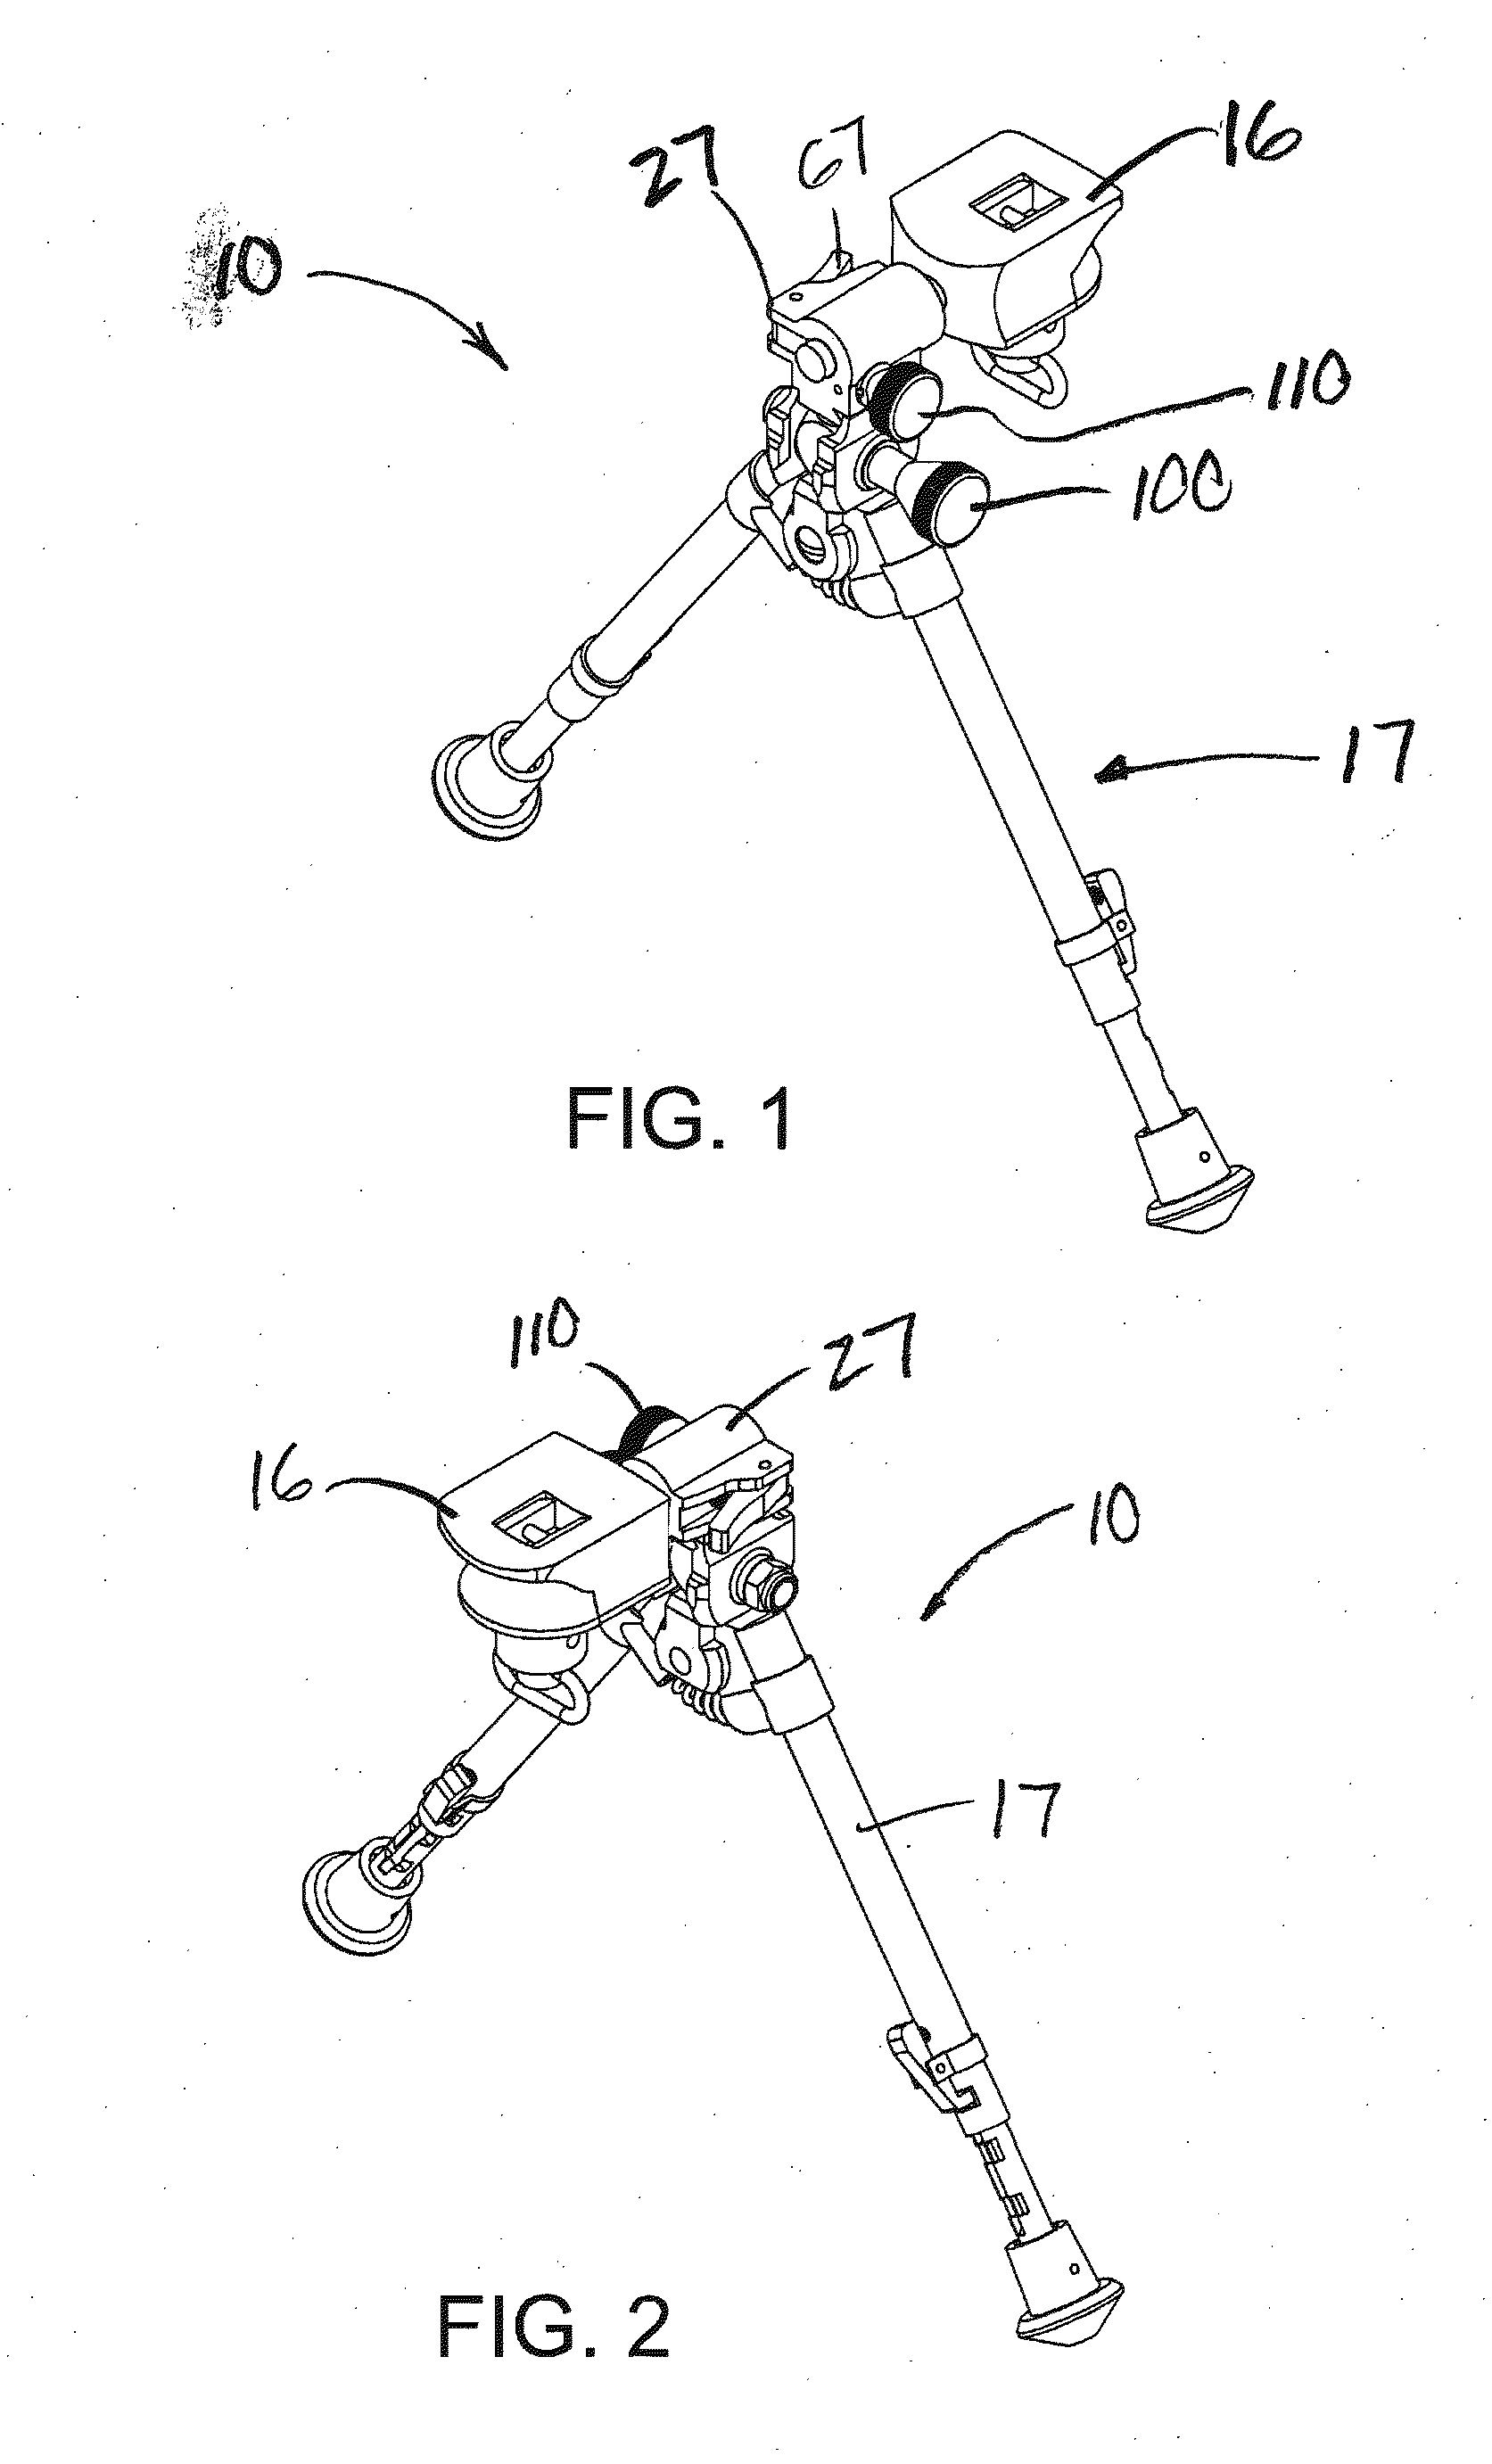 Method for Quick Disconnect Bipod Mount Assembly with adjustable and lockable Tilt, Pan and Cant Controls